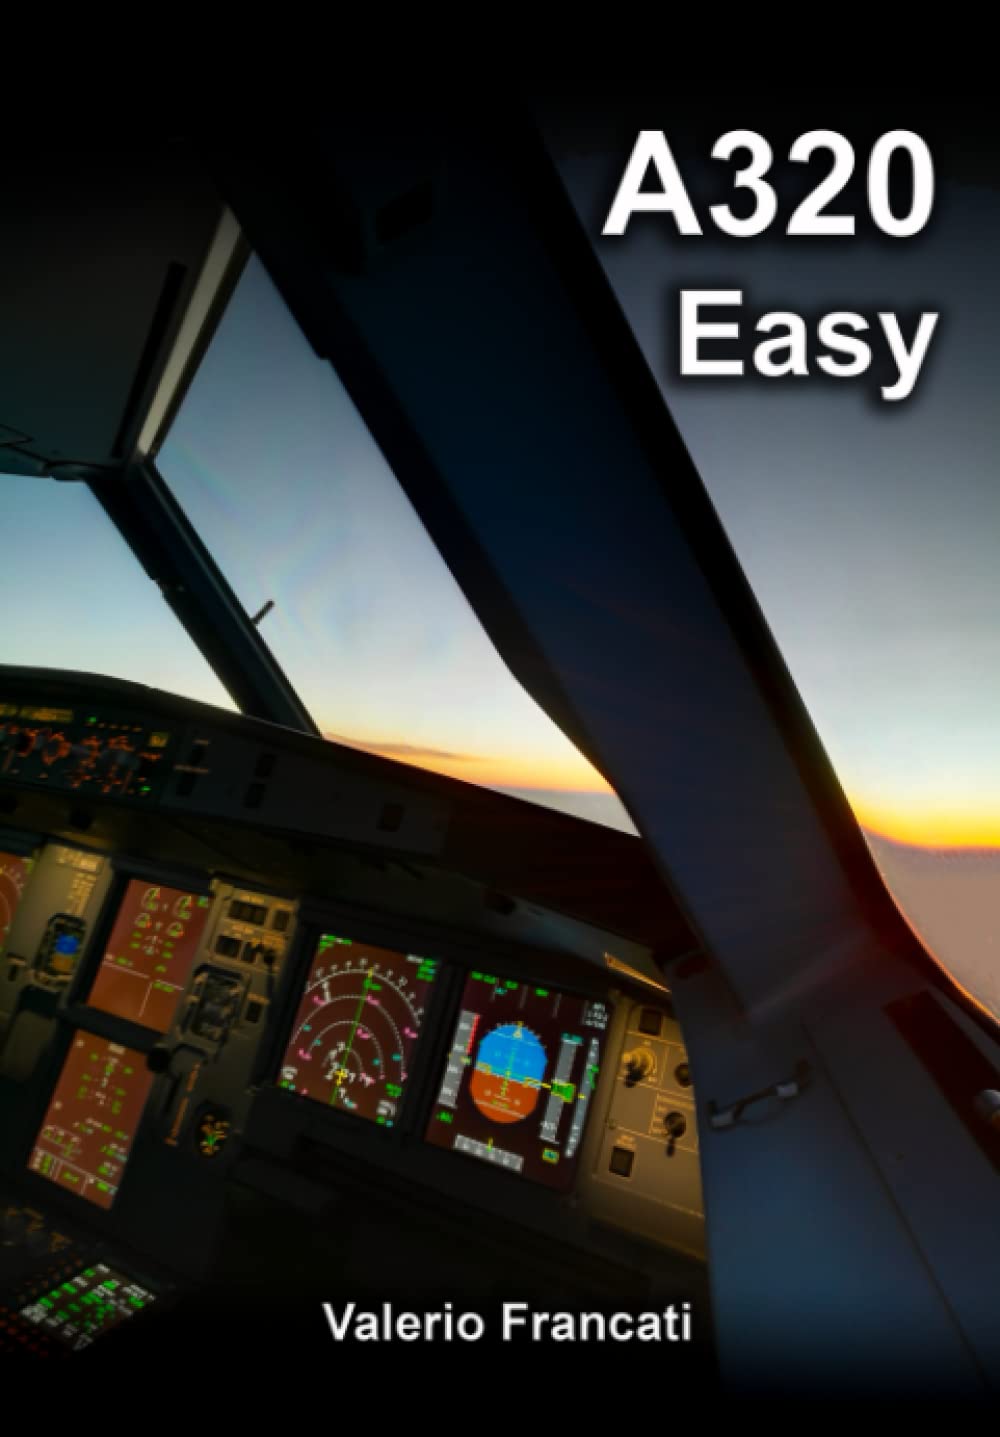 A320 Easy